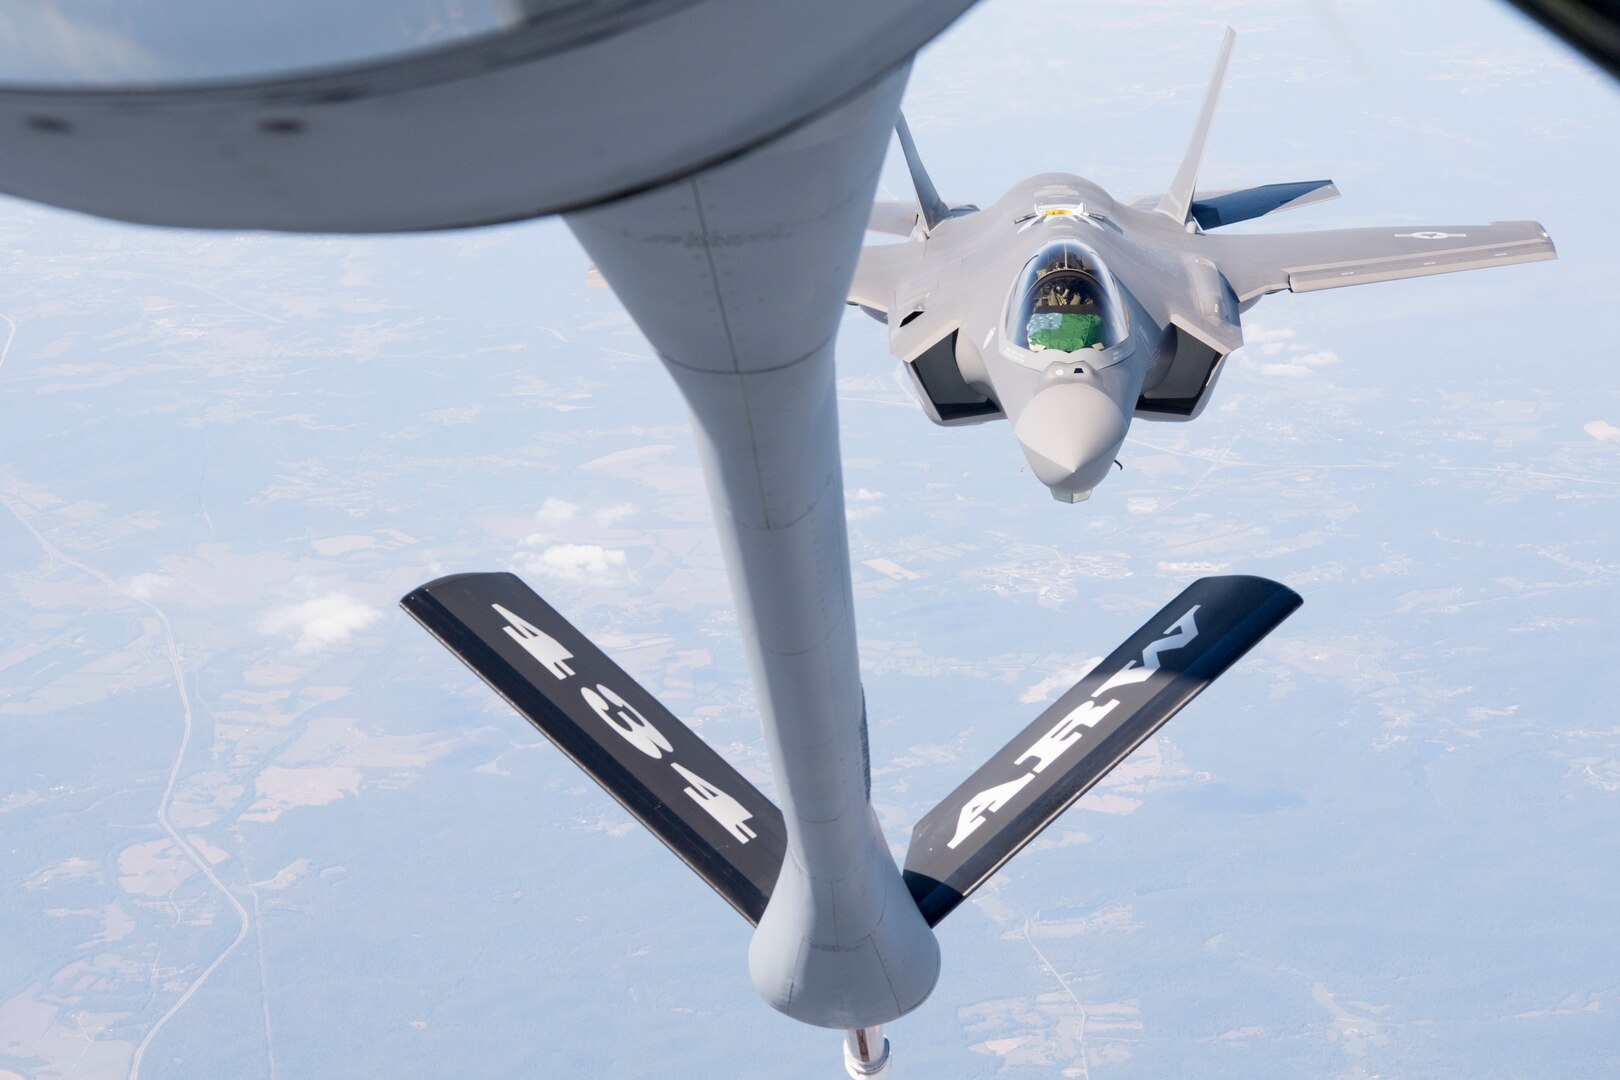 An F-35 Lightning II from the 158th Fighter Wing out of the Vermont Air National Guard Base, South Burlington, Vt., pulls up to a 434th Air Refueling Wing KC-135 Stratotanker from Grissom Air Reserve Base, Ind., for fuel over the Midwest Sept. 19, 2019. The 158th FW is the first Air National Guard unit to receive the aircraft, and will be the second operational F-35 wing in the U.S. Air Force. (U.S. Air Force photo/Master Sgt. Ben Mota)